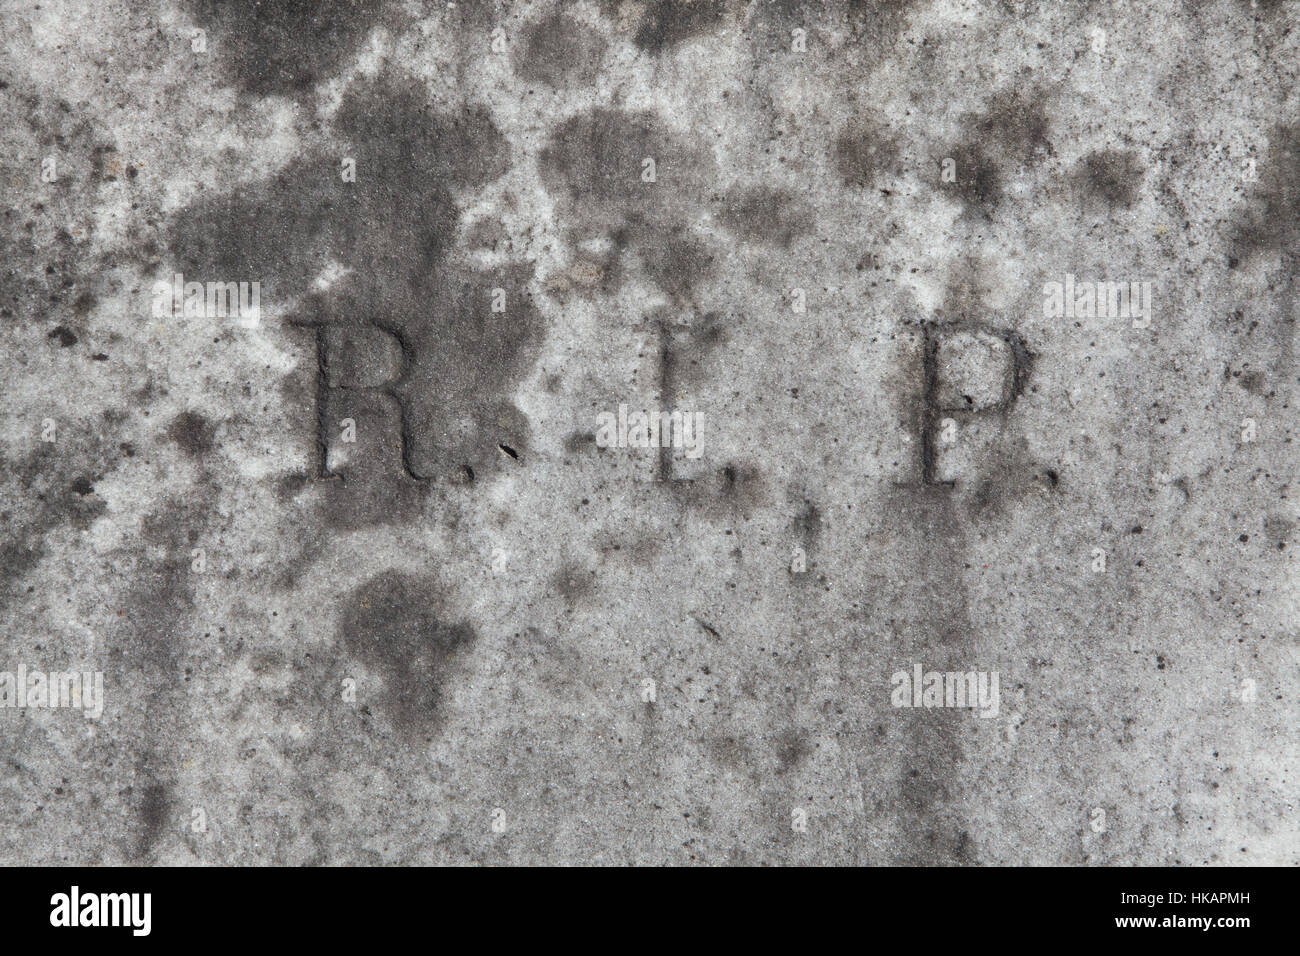 RIP. Rest in peace. Traditional inscription on the grave. Stock Photo